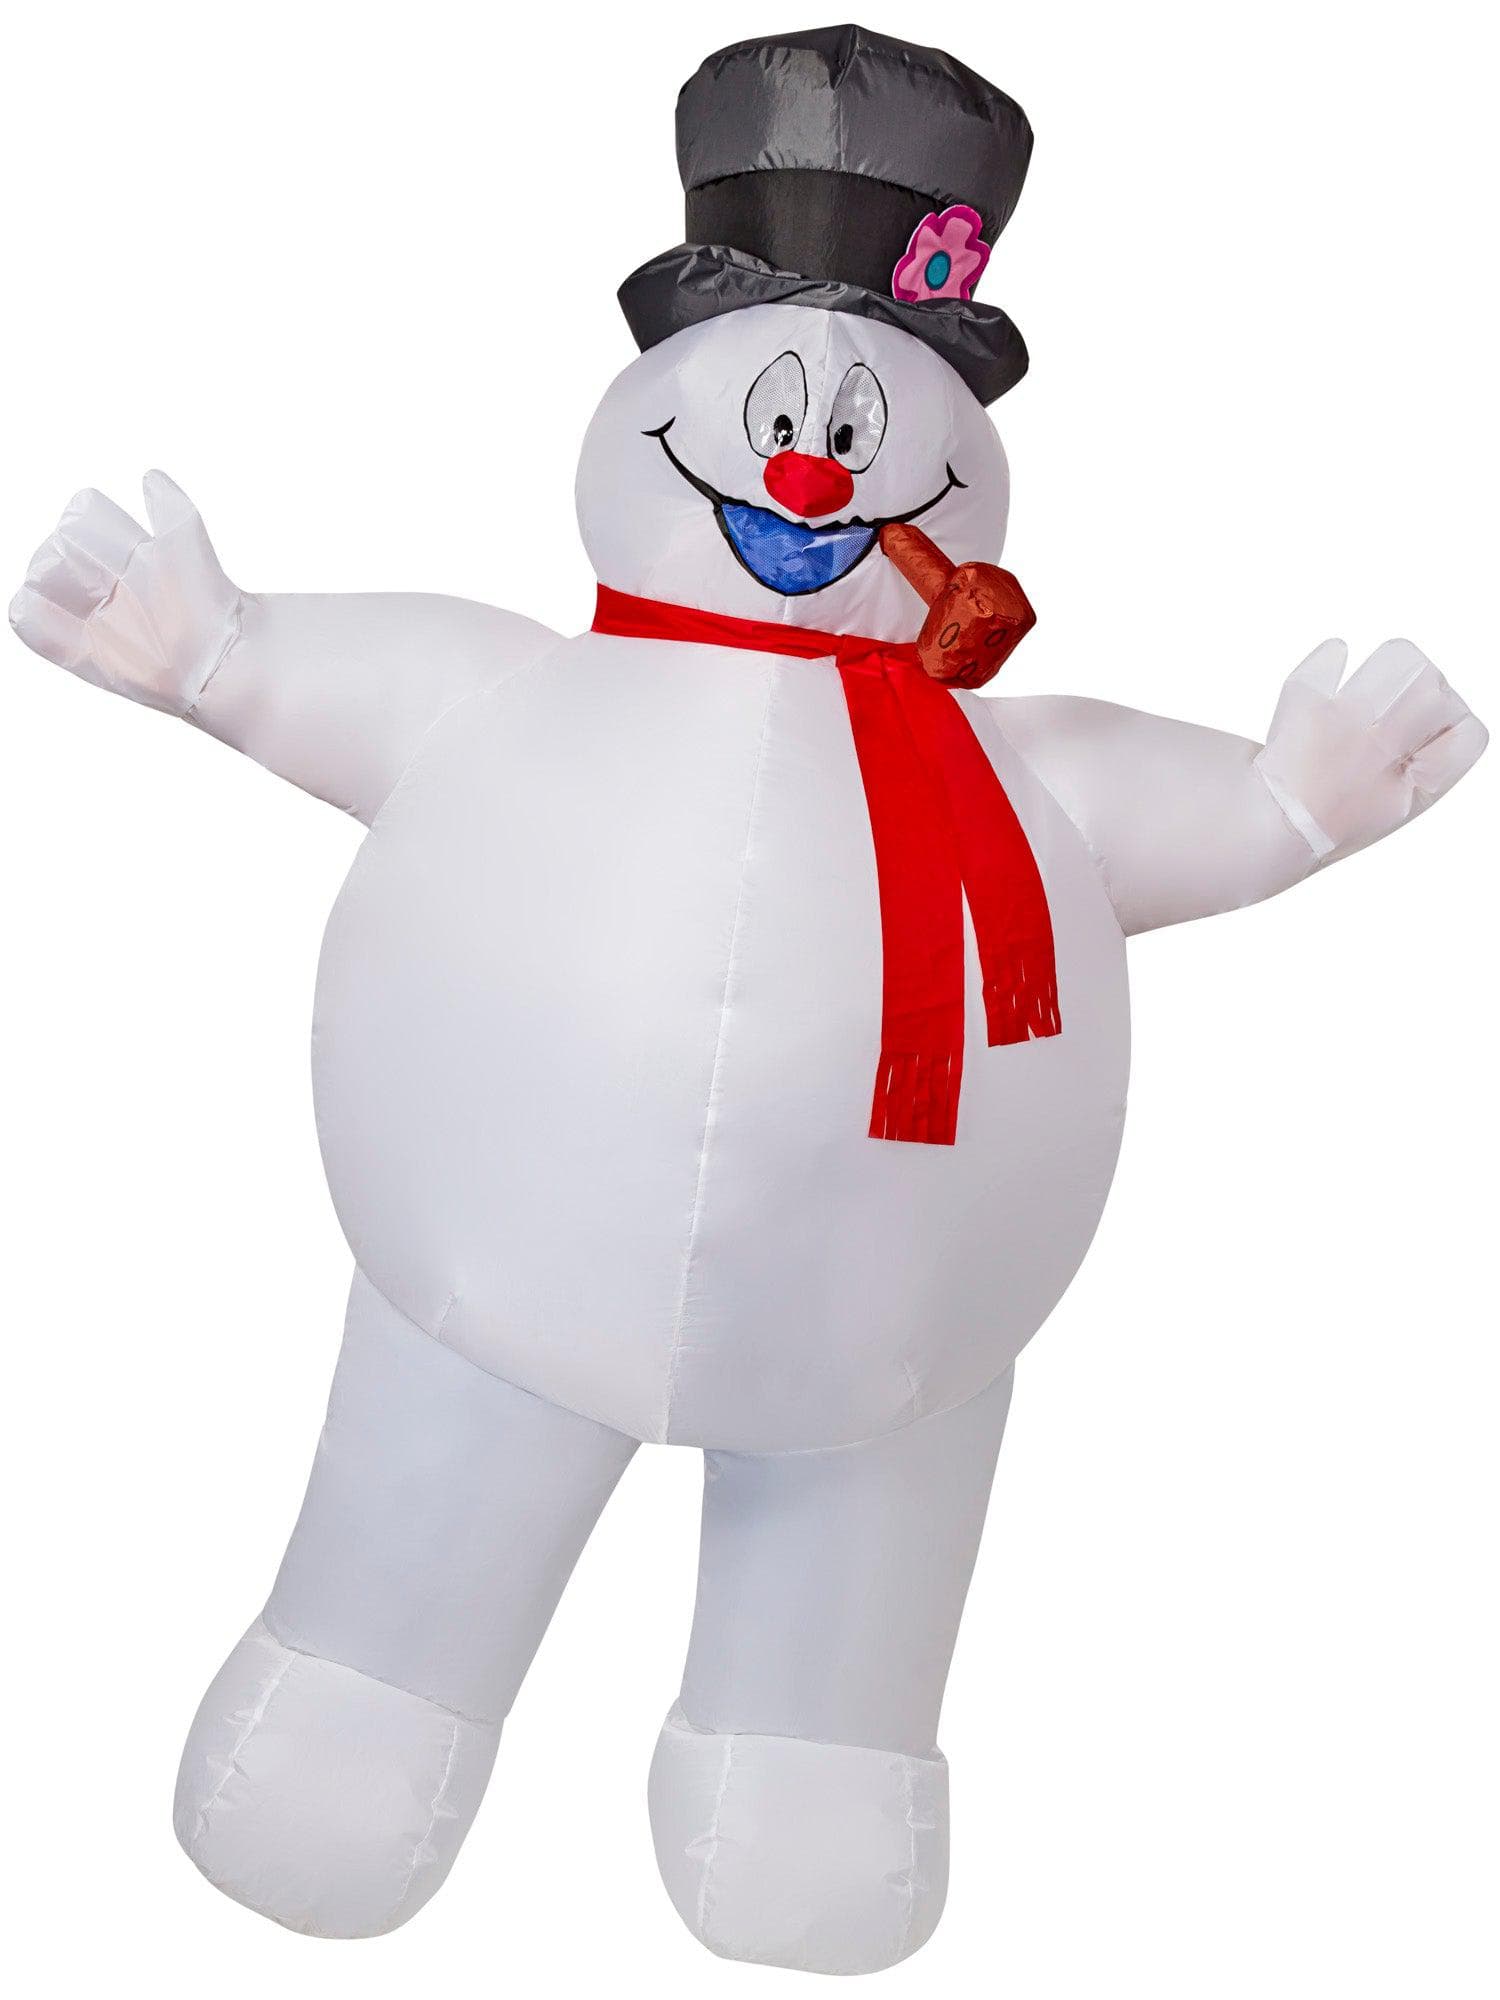 Adult Frosty the Snowman Inflatable Costume - costumes.com